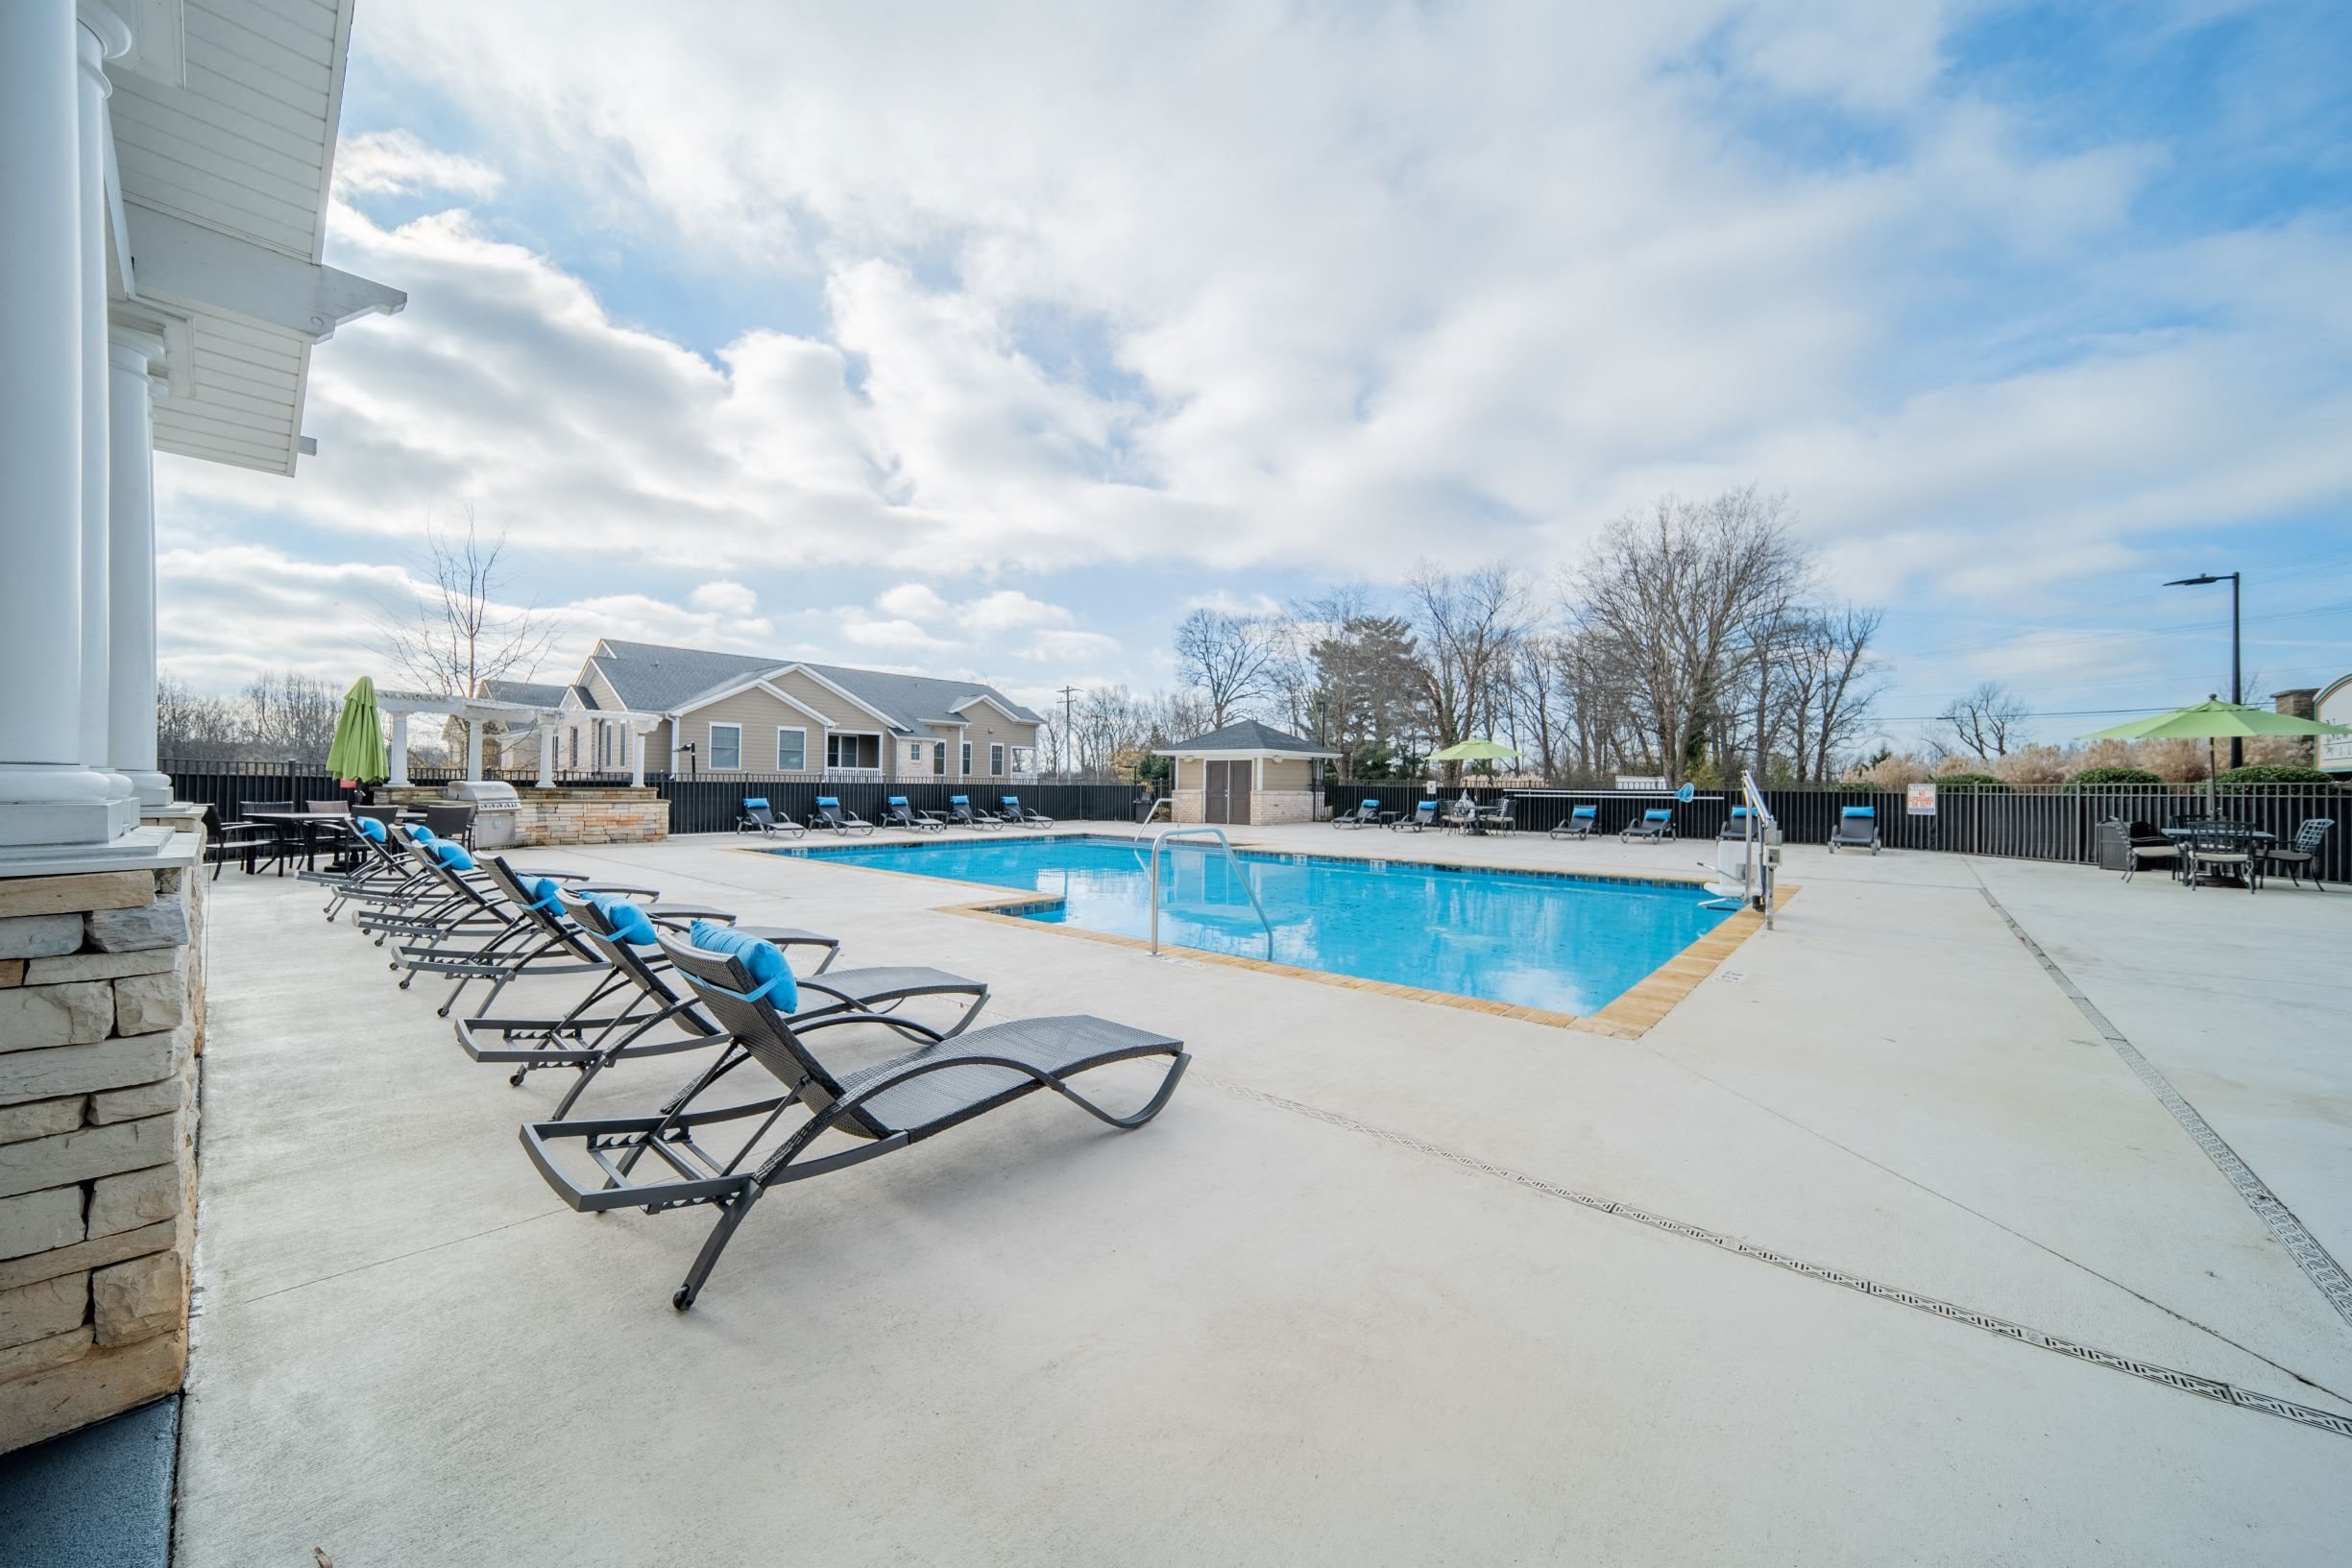 Sparkling swimming pool and spacious sundeck at Piedmont Place apartments in Greensboro, NC